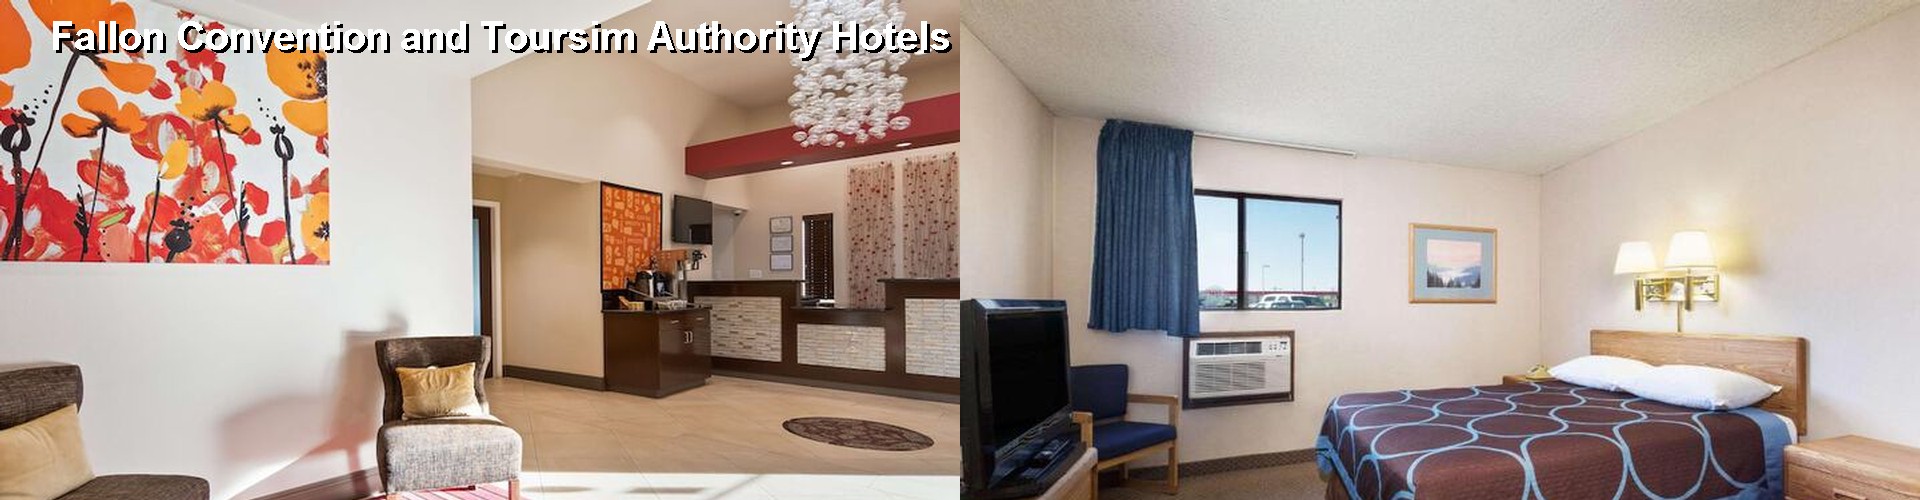 5 Best Hotels near Fallon Convention and Toursim Authority